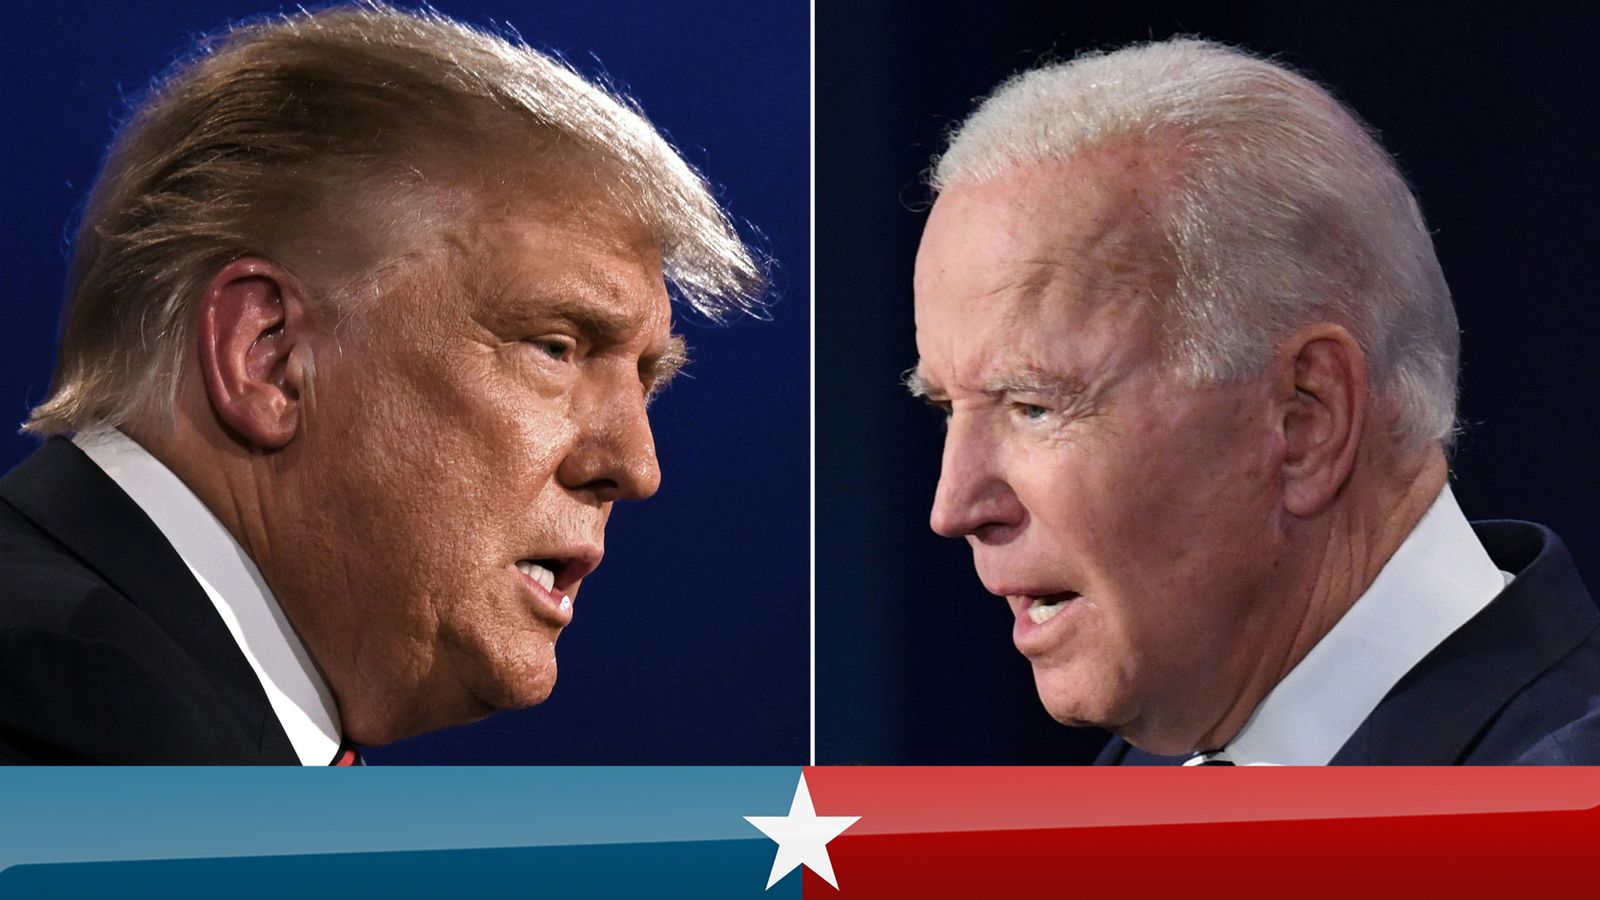 US Election 2020: Trump reverts to form while Biden focuses on pandemic as fight for Florida intensifies